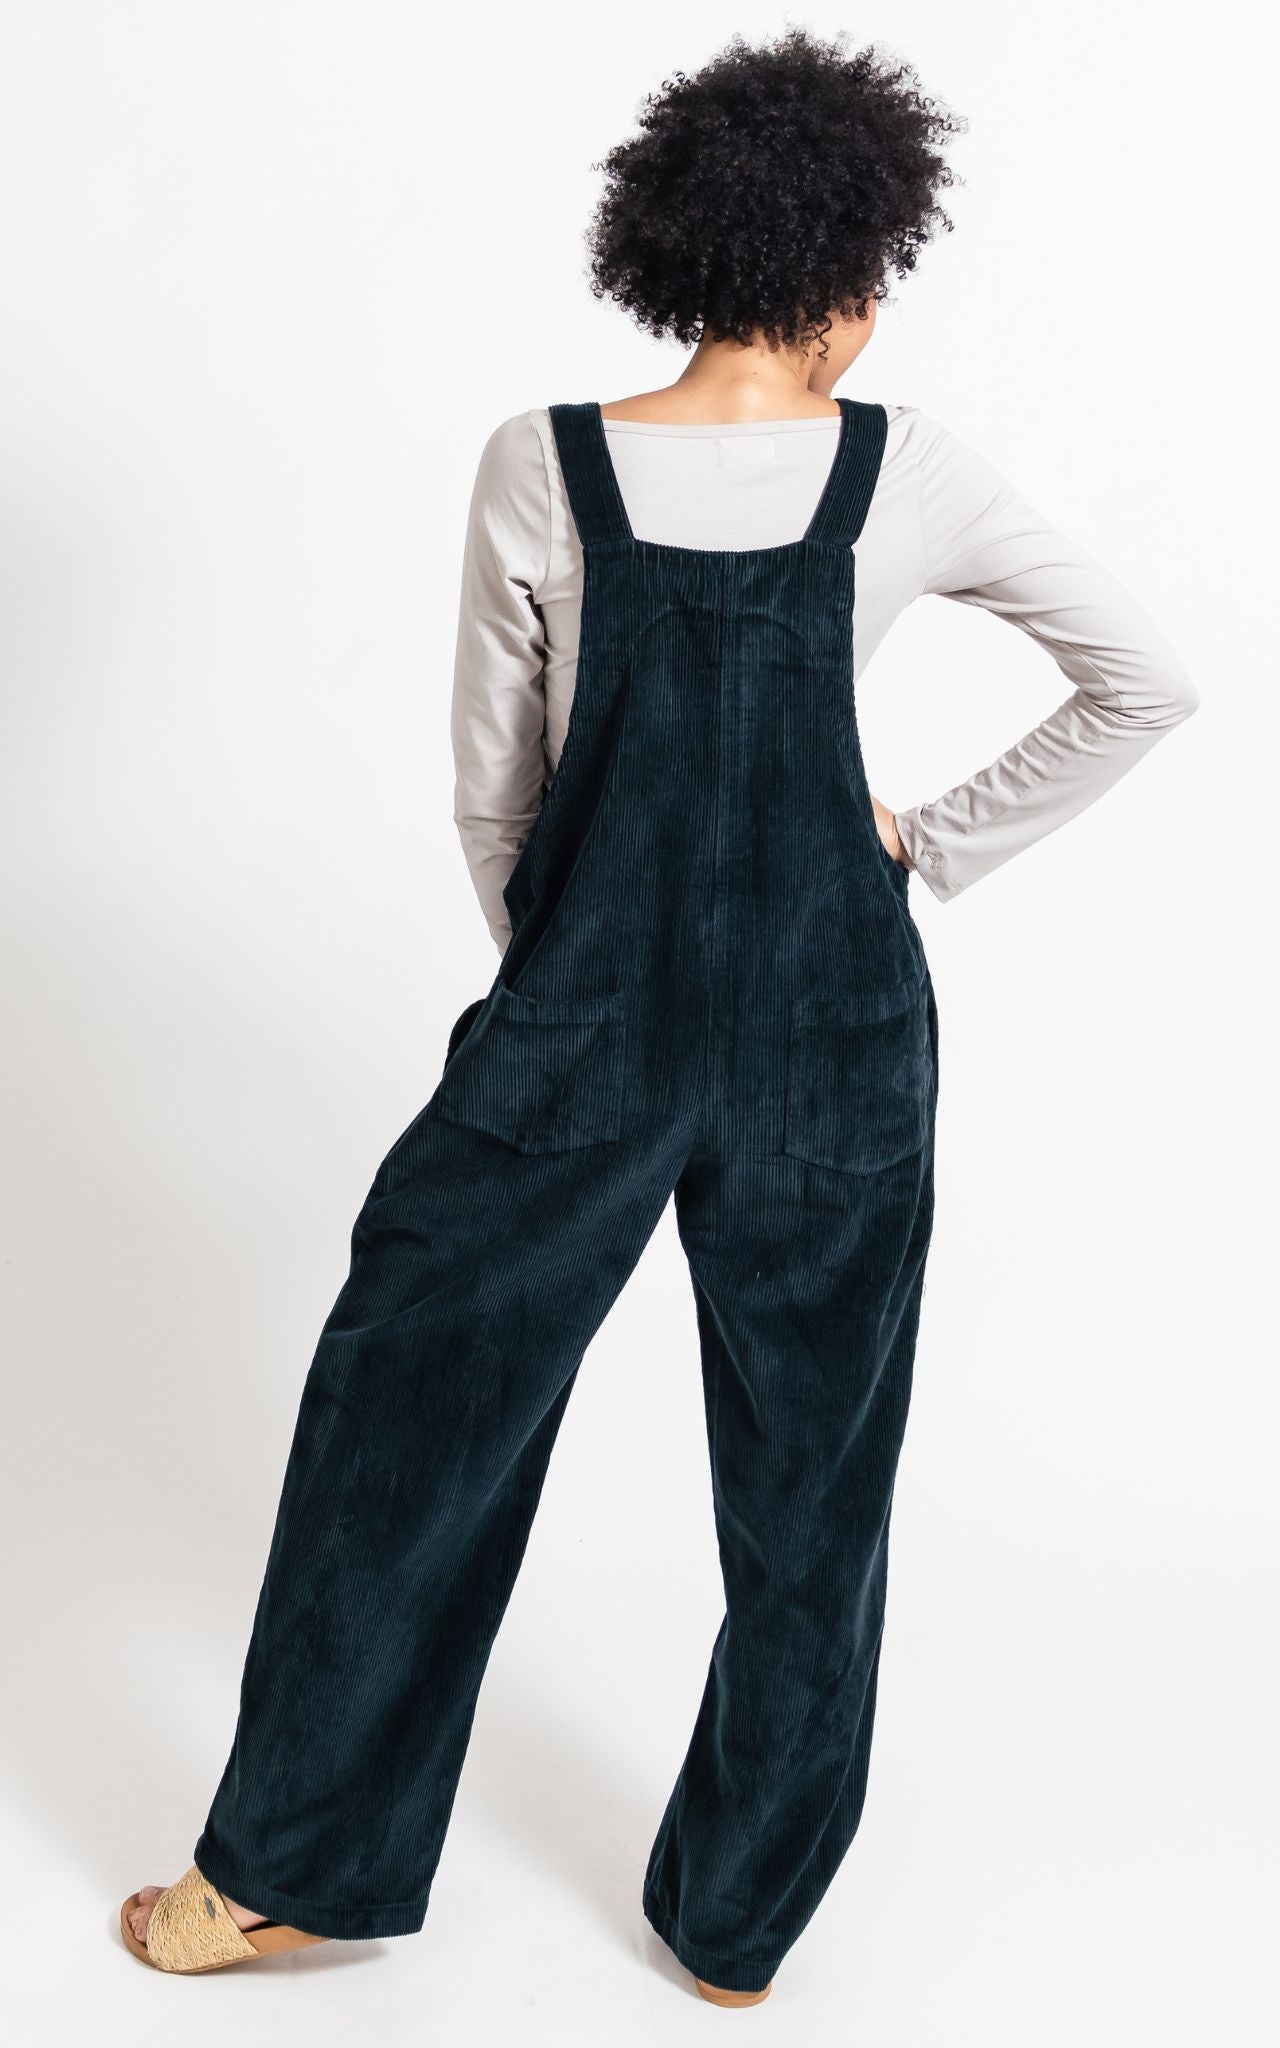 Surya Australia Corduroy Overalls Dungarees made in Nepal - Midnight Teal